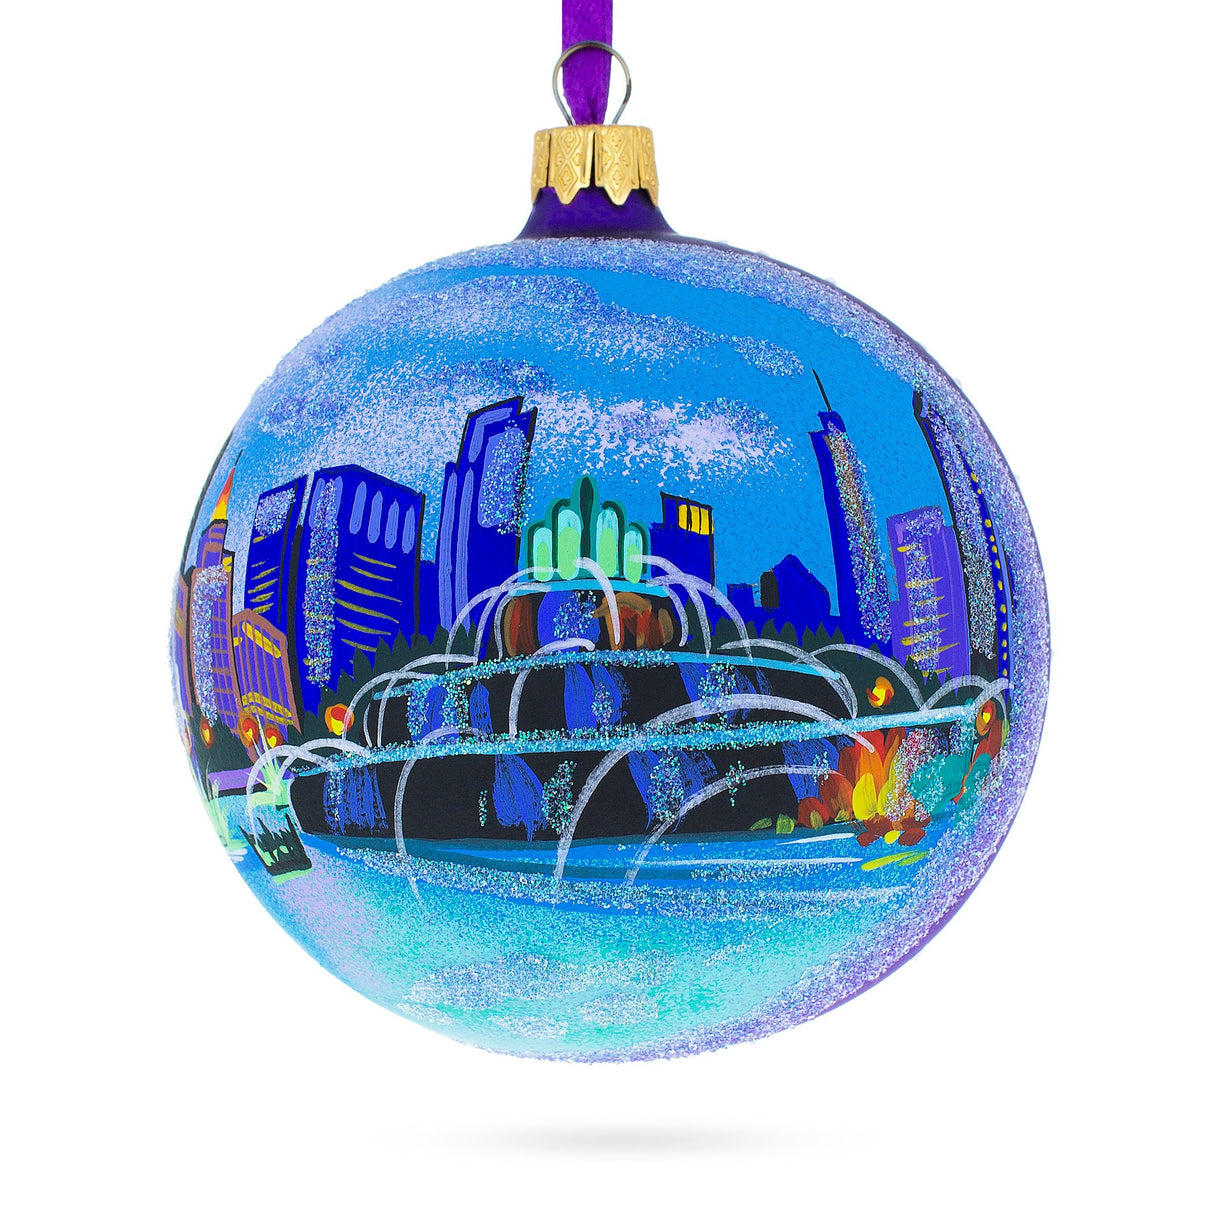 Buckingham Fountain, Chicago, Illinois, USA Glass Ball Christmas Ornament 4 Inches in Multi color, Round shape